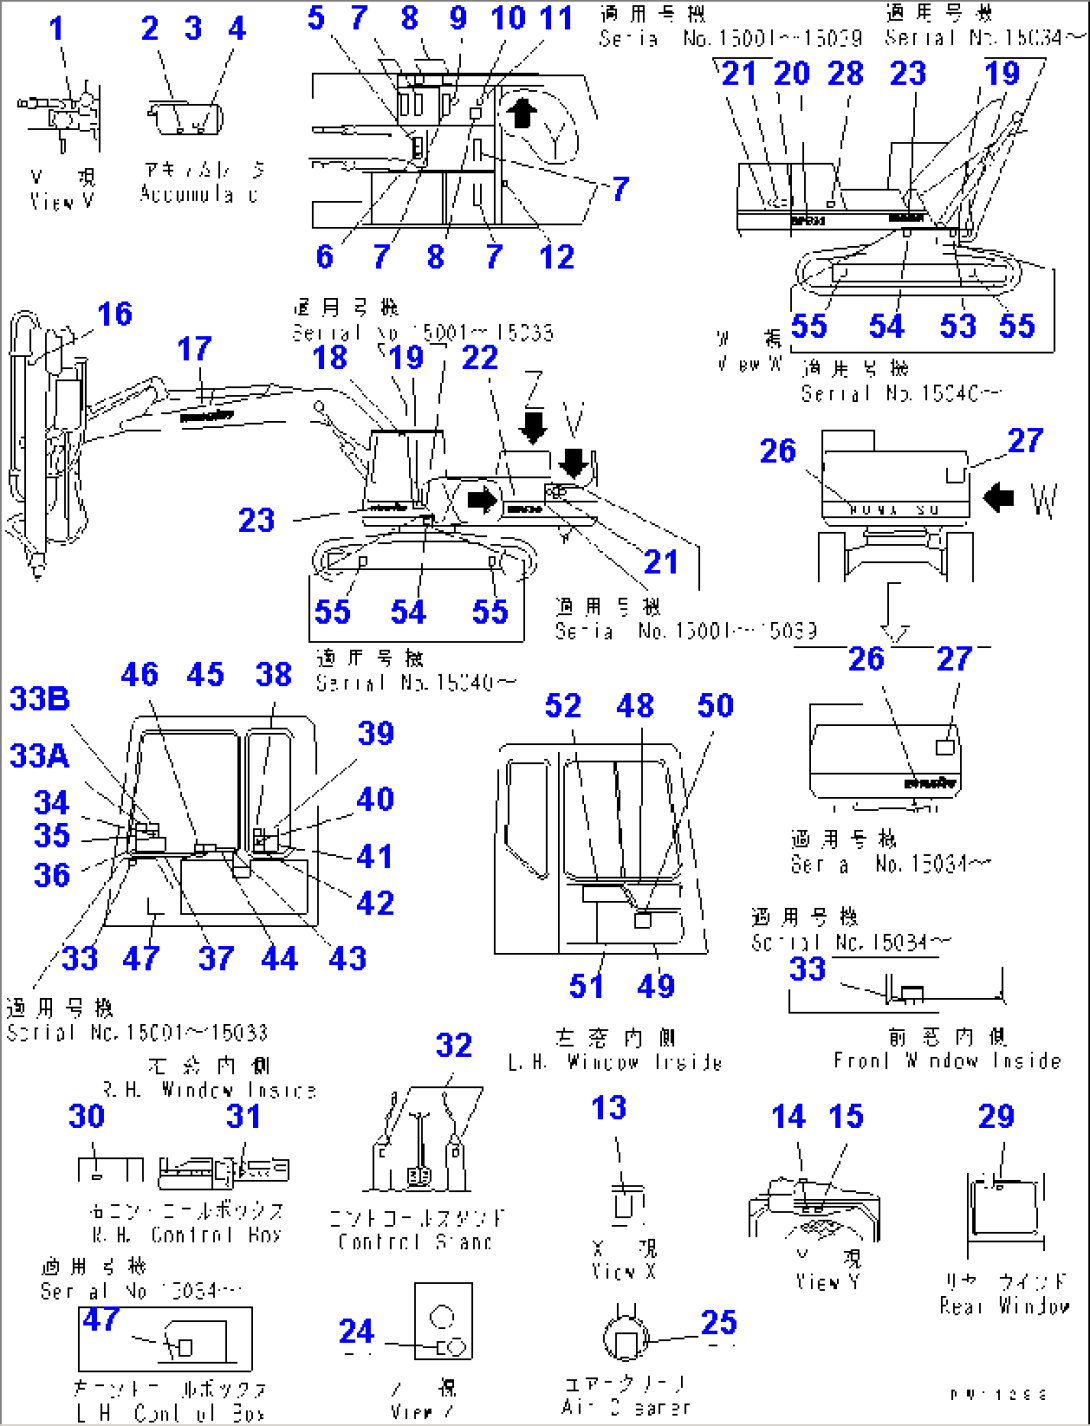 MARKS AND PLATES(#15001-15039)